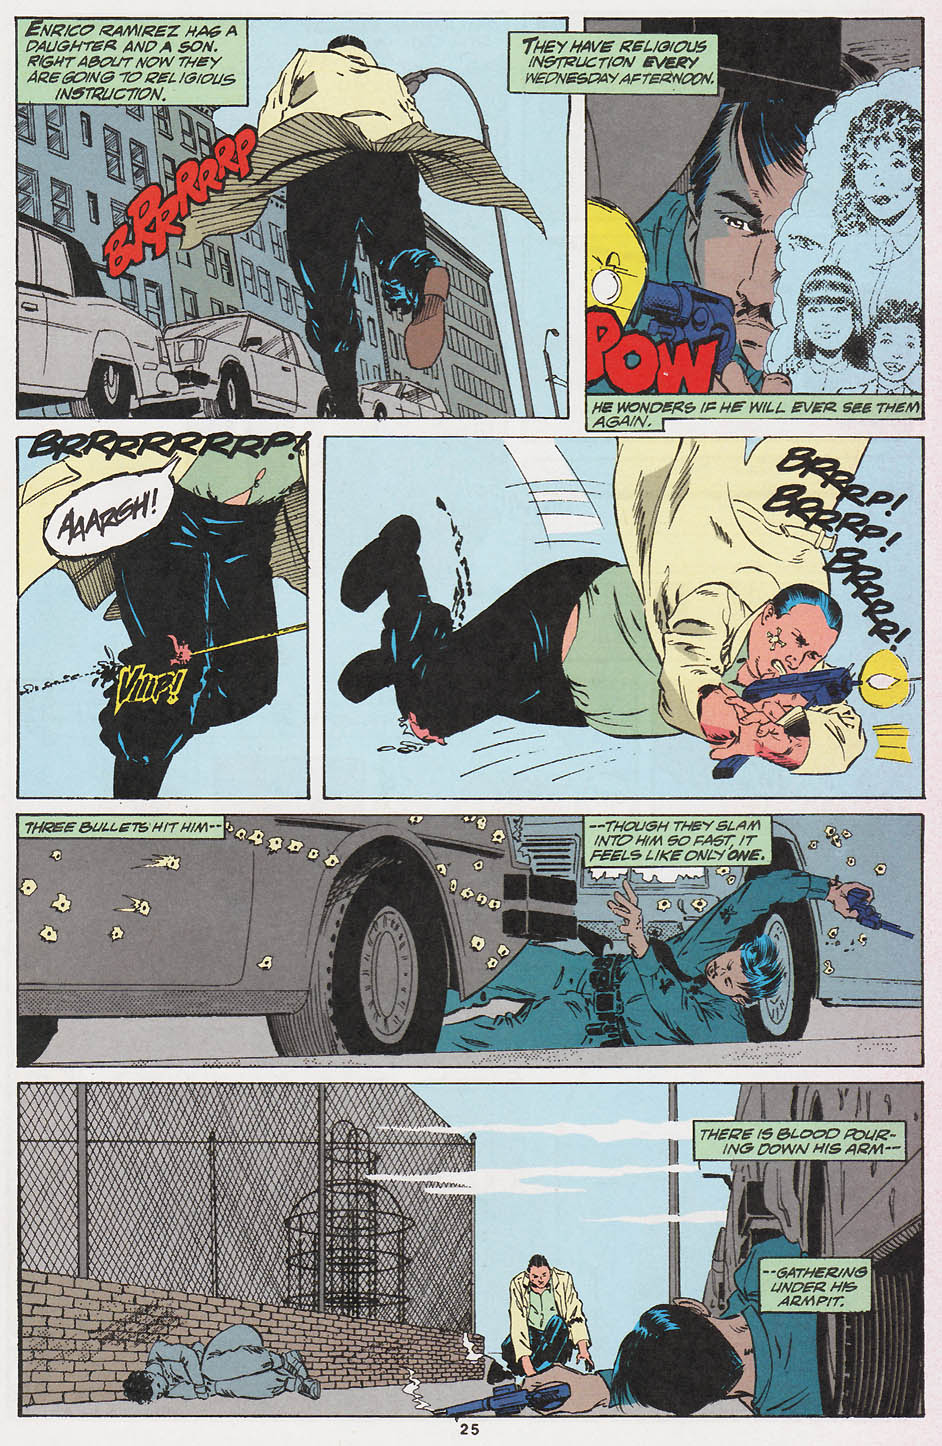 Spider-Man (1990) 27_-_Theres_Something_About_A_Gun_Part_1 Page 18